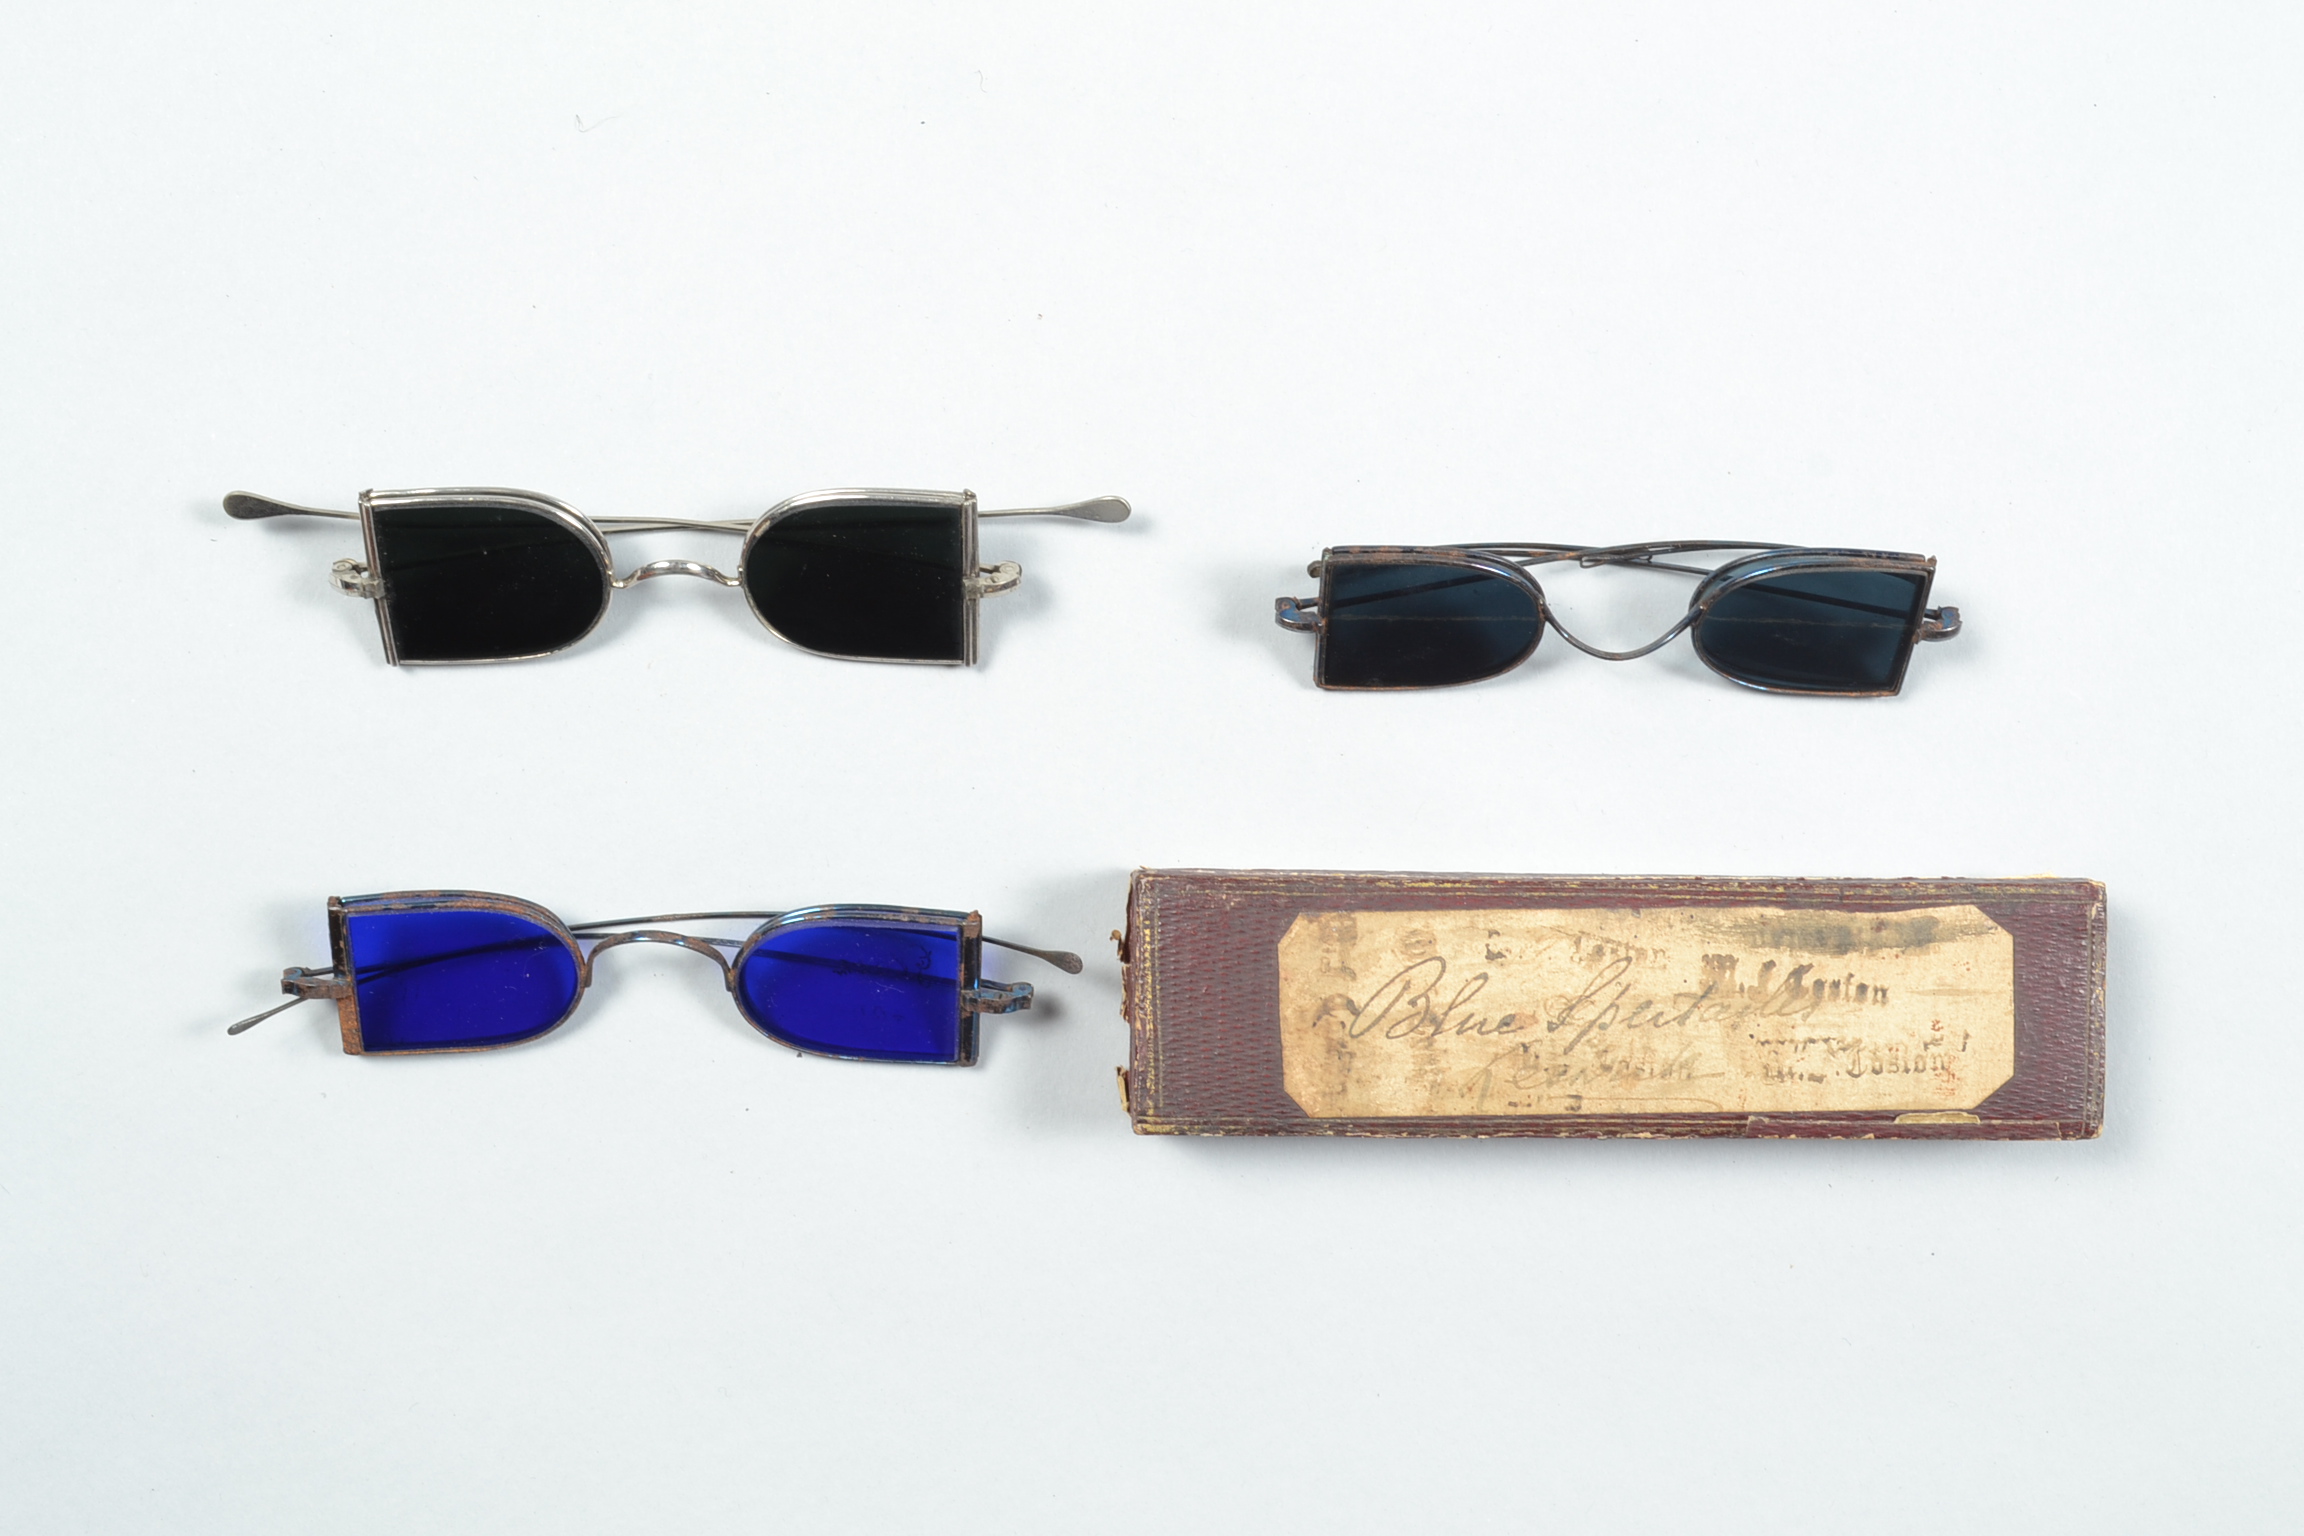 Mid-19th Century Protective Spectacles, D-shaped, with side visors, cylinder bridges - blued